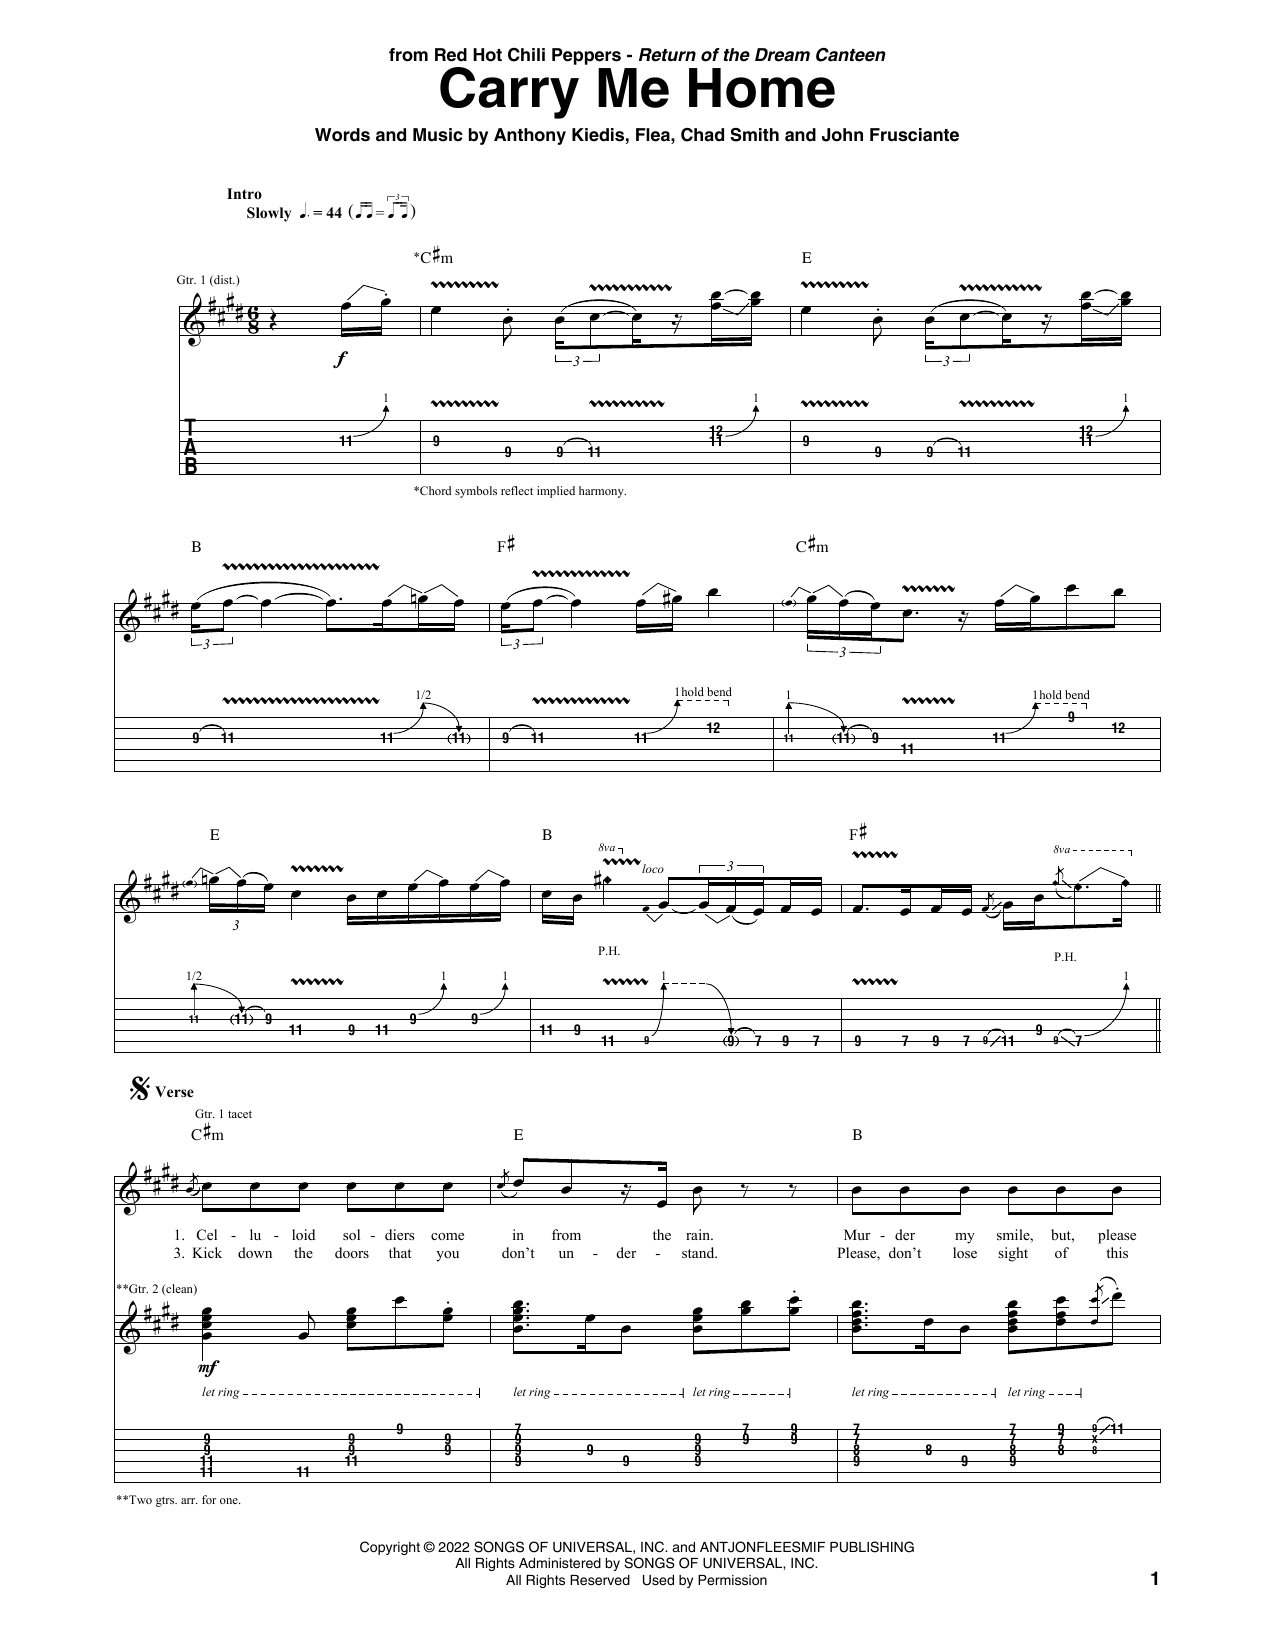 Download Red Hot Chili Peppers Carry Me Home Sheet Music